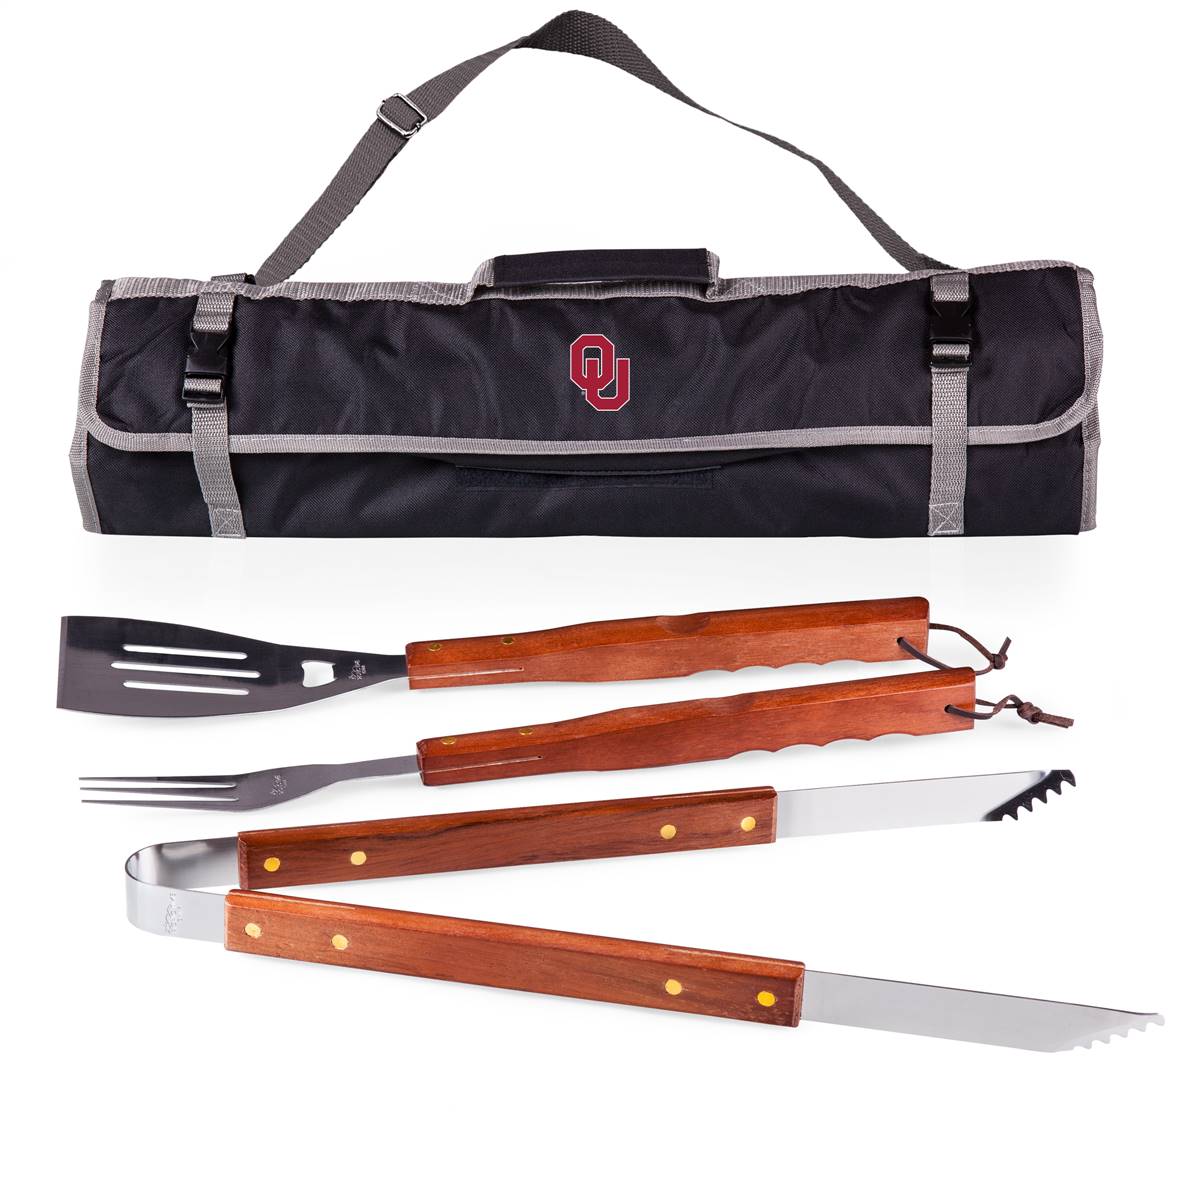 Oklahoma Team Sports Sooners 3 Piece BBQ Tool Set and Tote - image 1 of 2